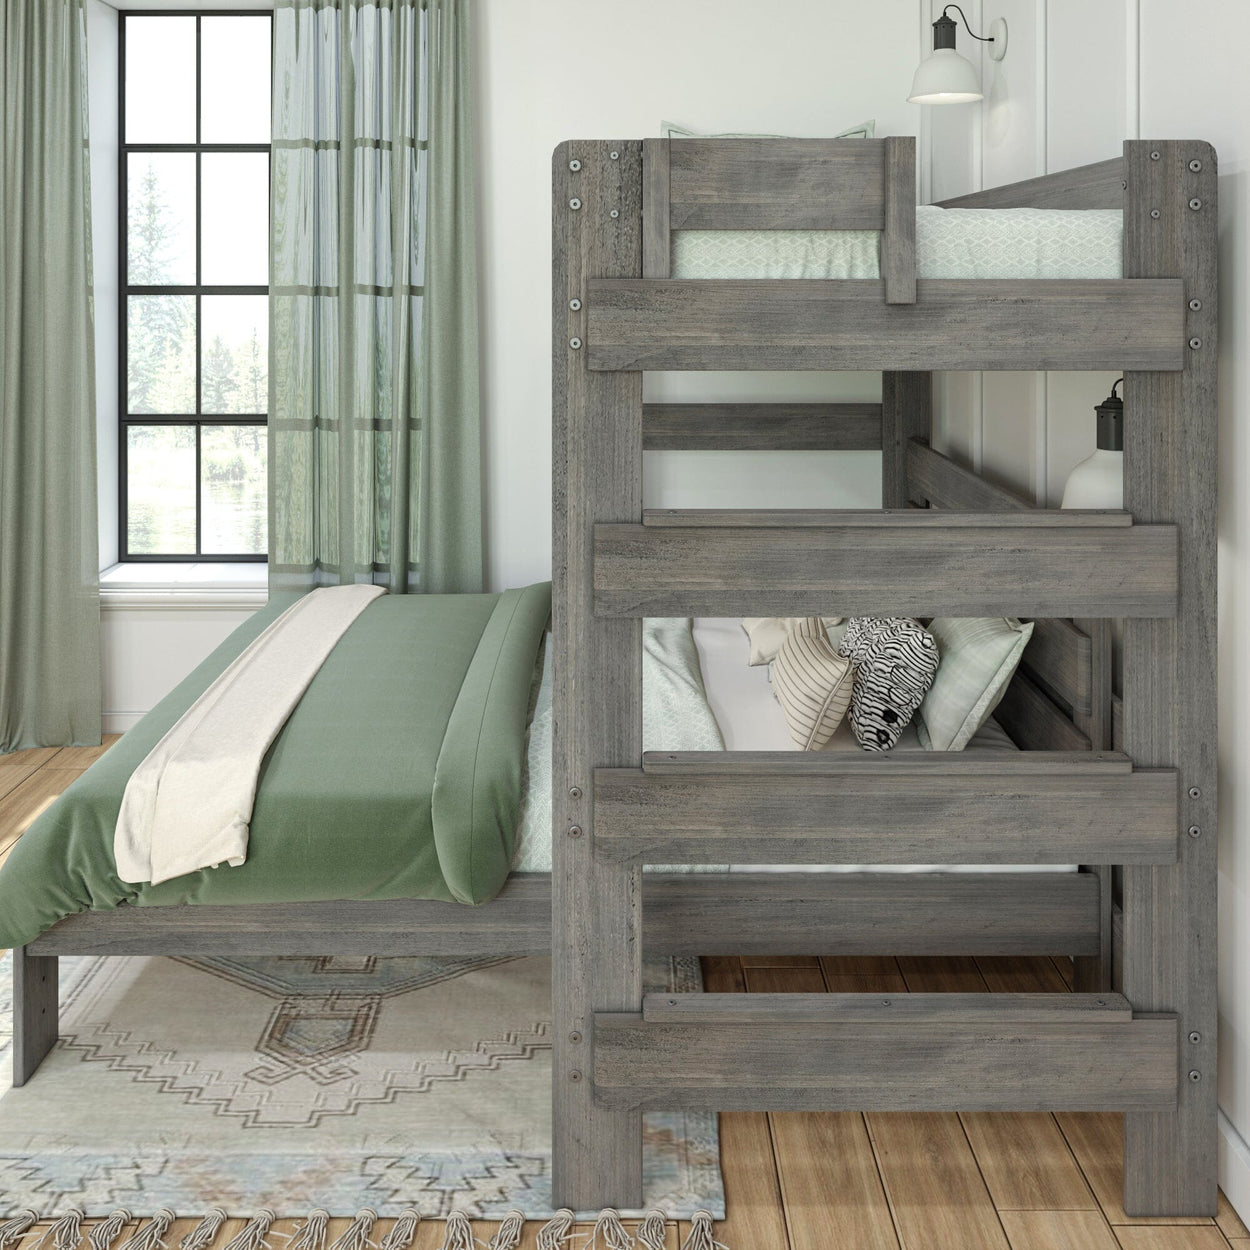 19-813-185 : Bunk Beds Farmhouse Twin over Queen L-Shaped Bunk Bed, Driftwood